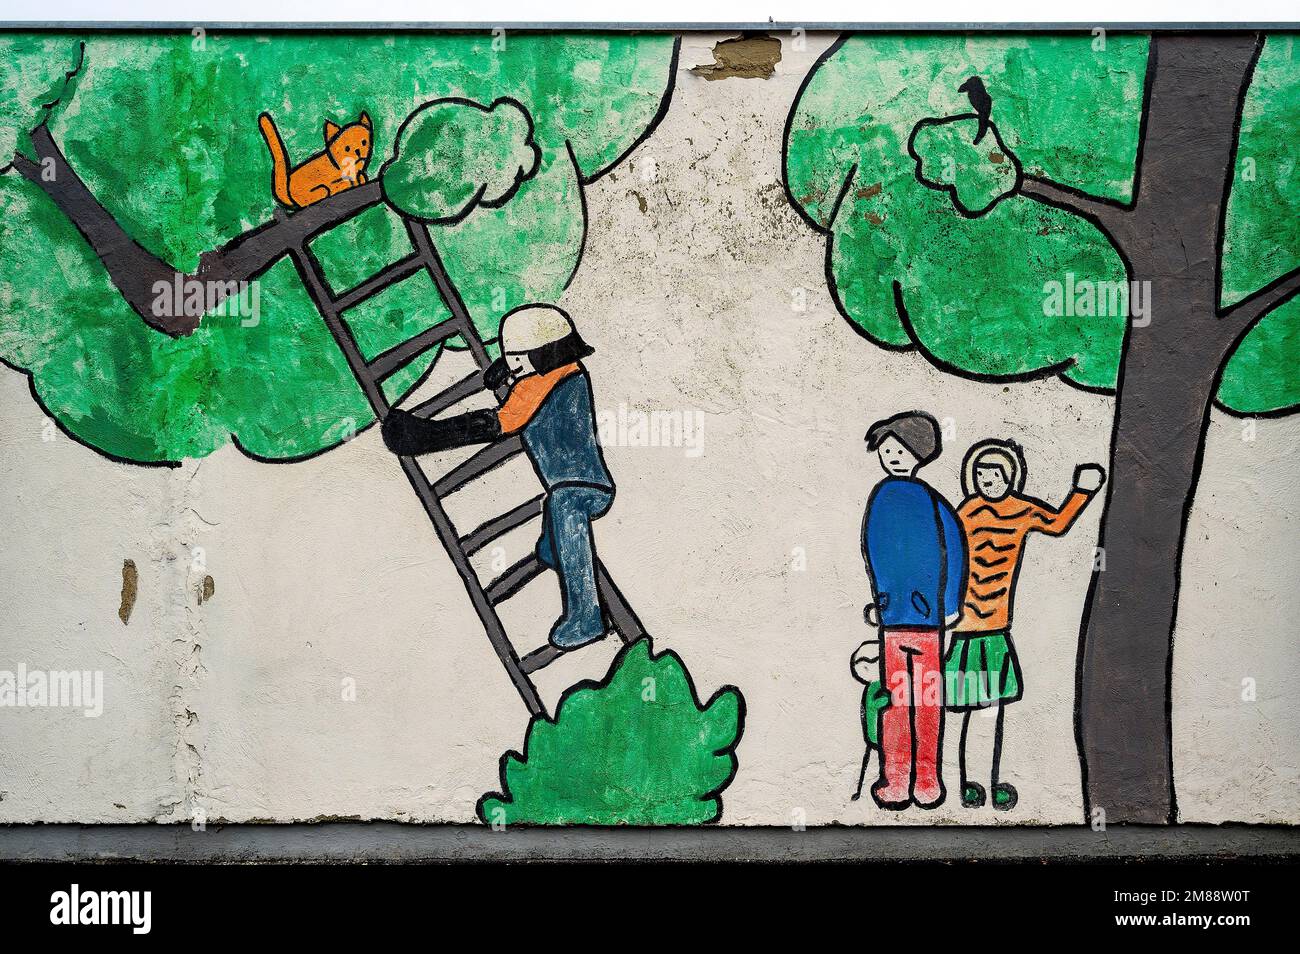 Childlike painting on decaying wall, fireman fetches a cat from a tree, Kempten, Allgaeu, Bavaria, Germany Stock Photo